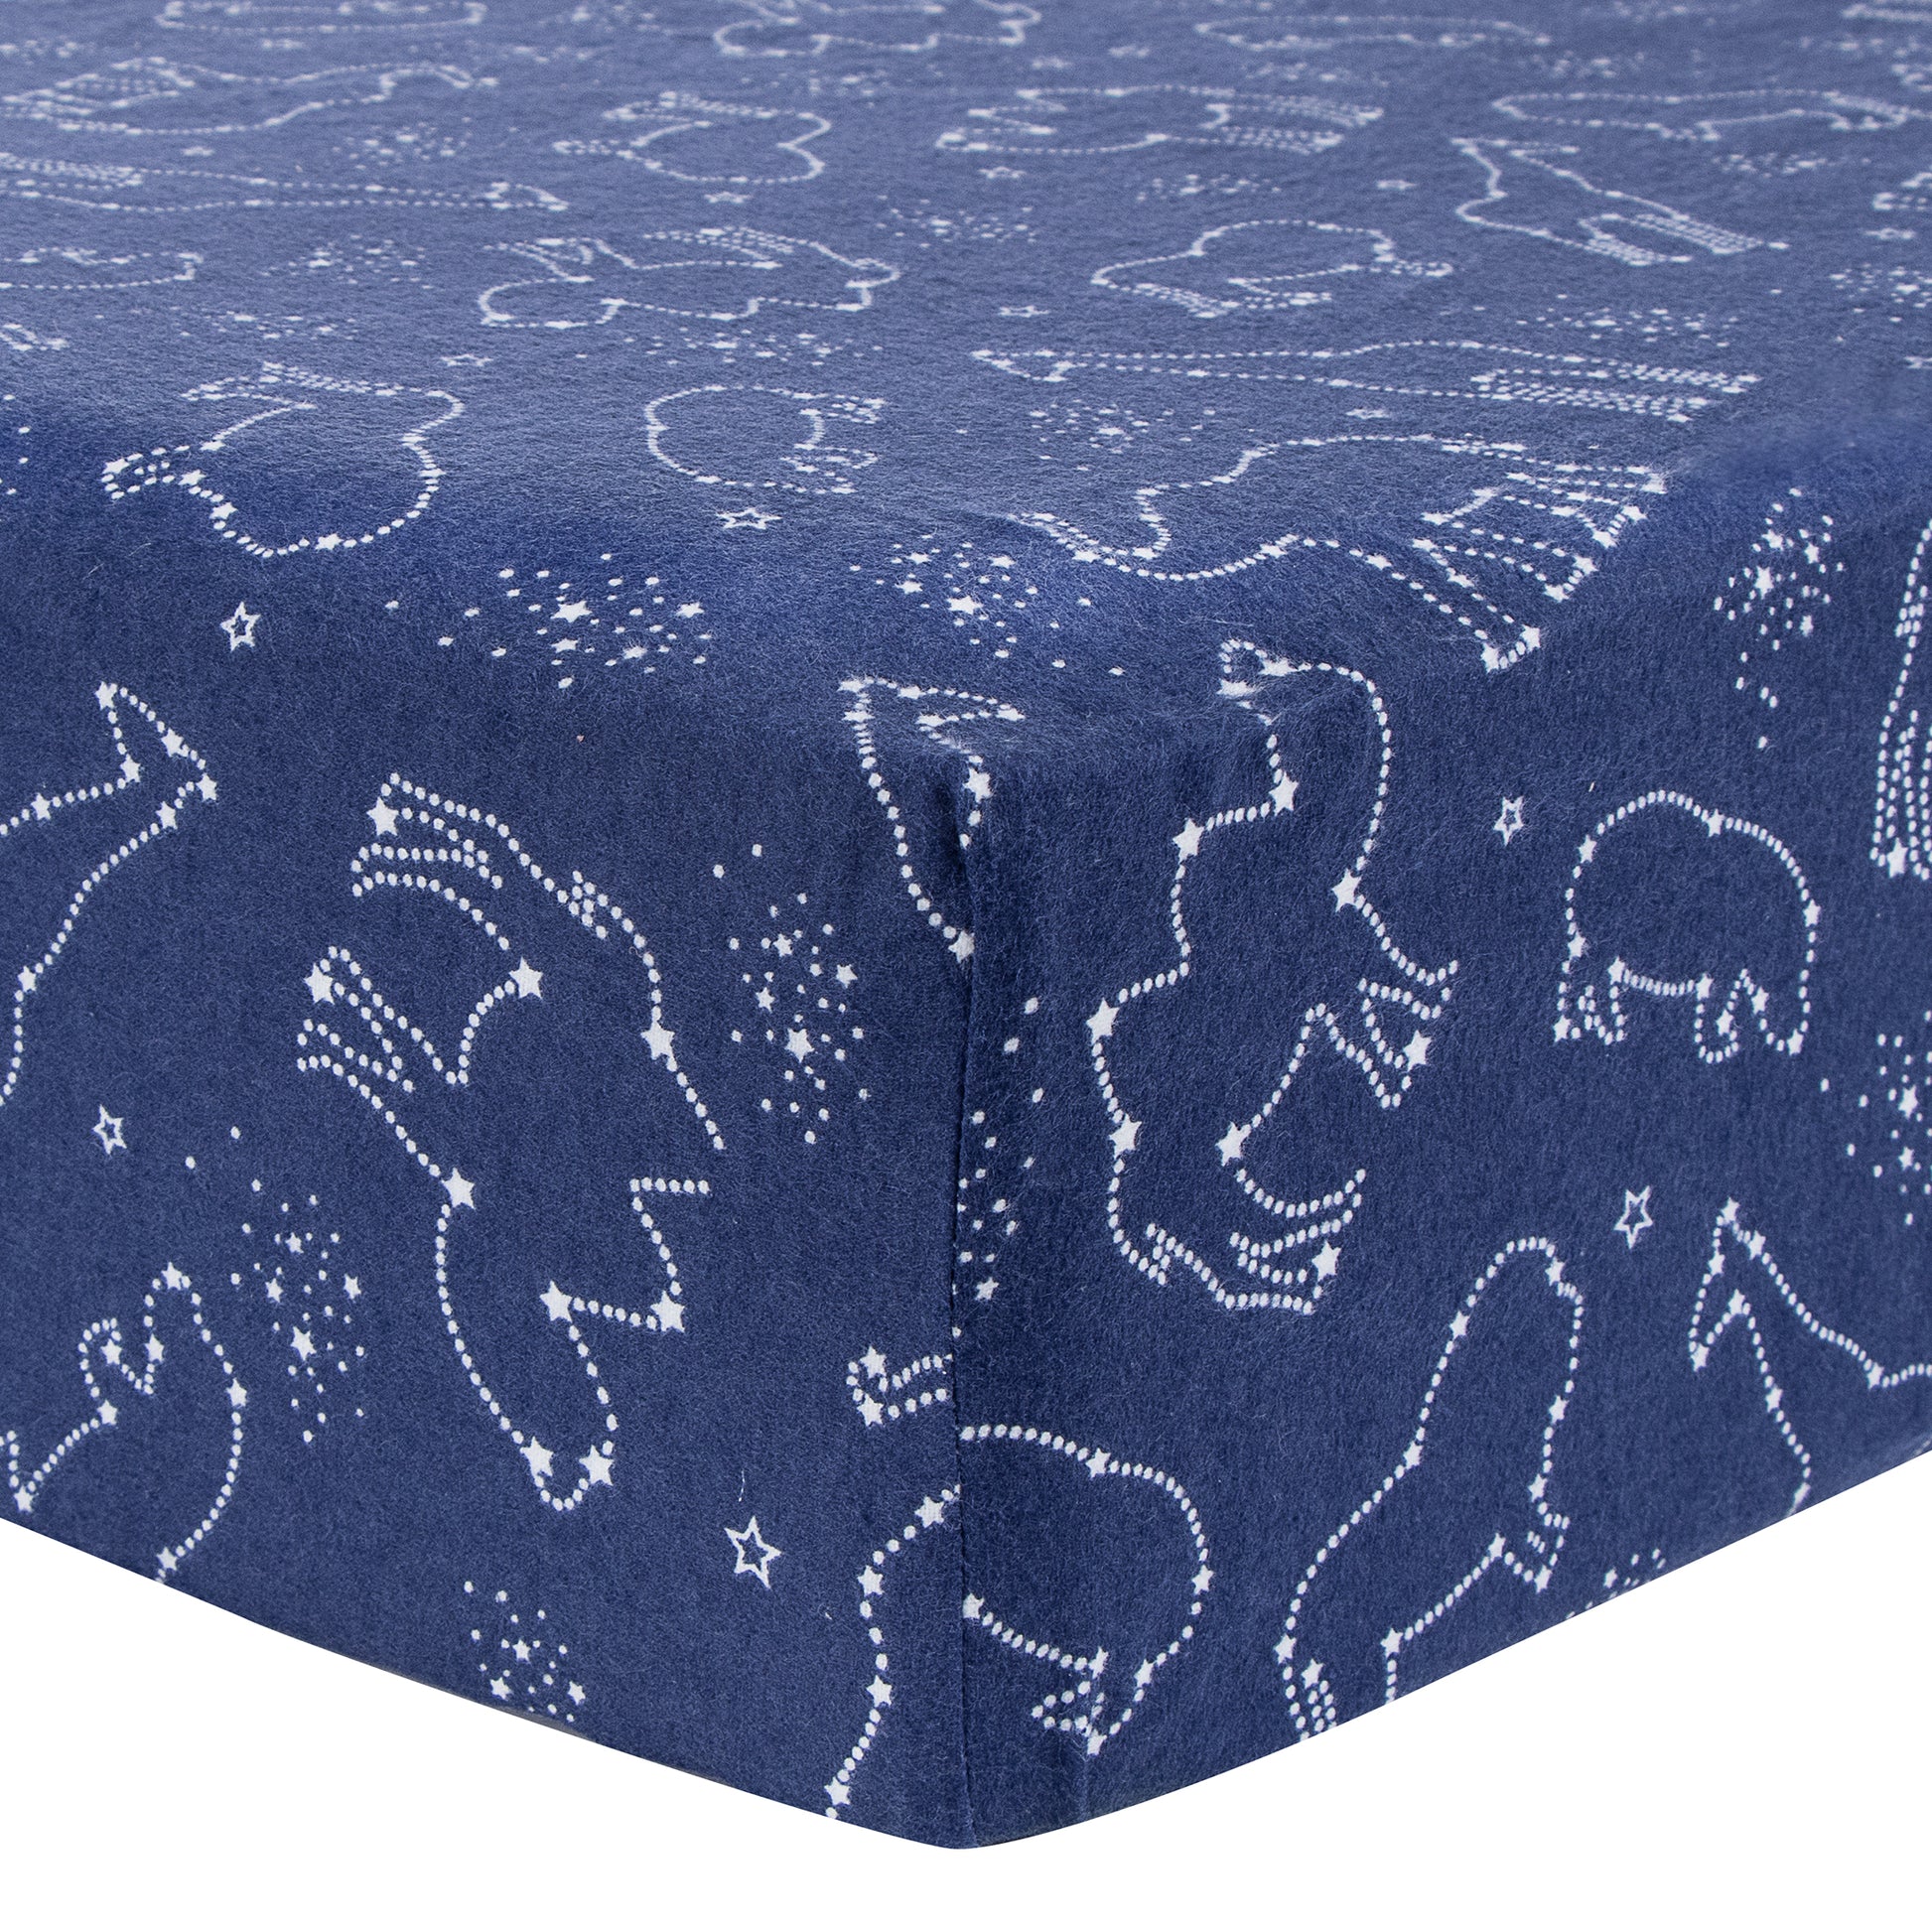 Starry Safari Deluxe Flannel Fitted Crib Sheet - Corner View